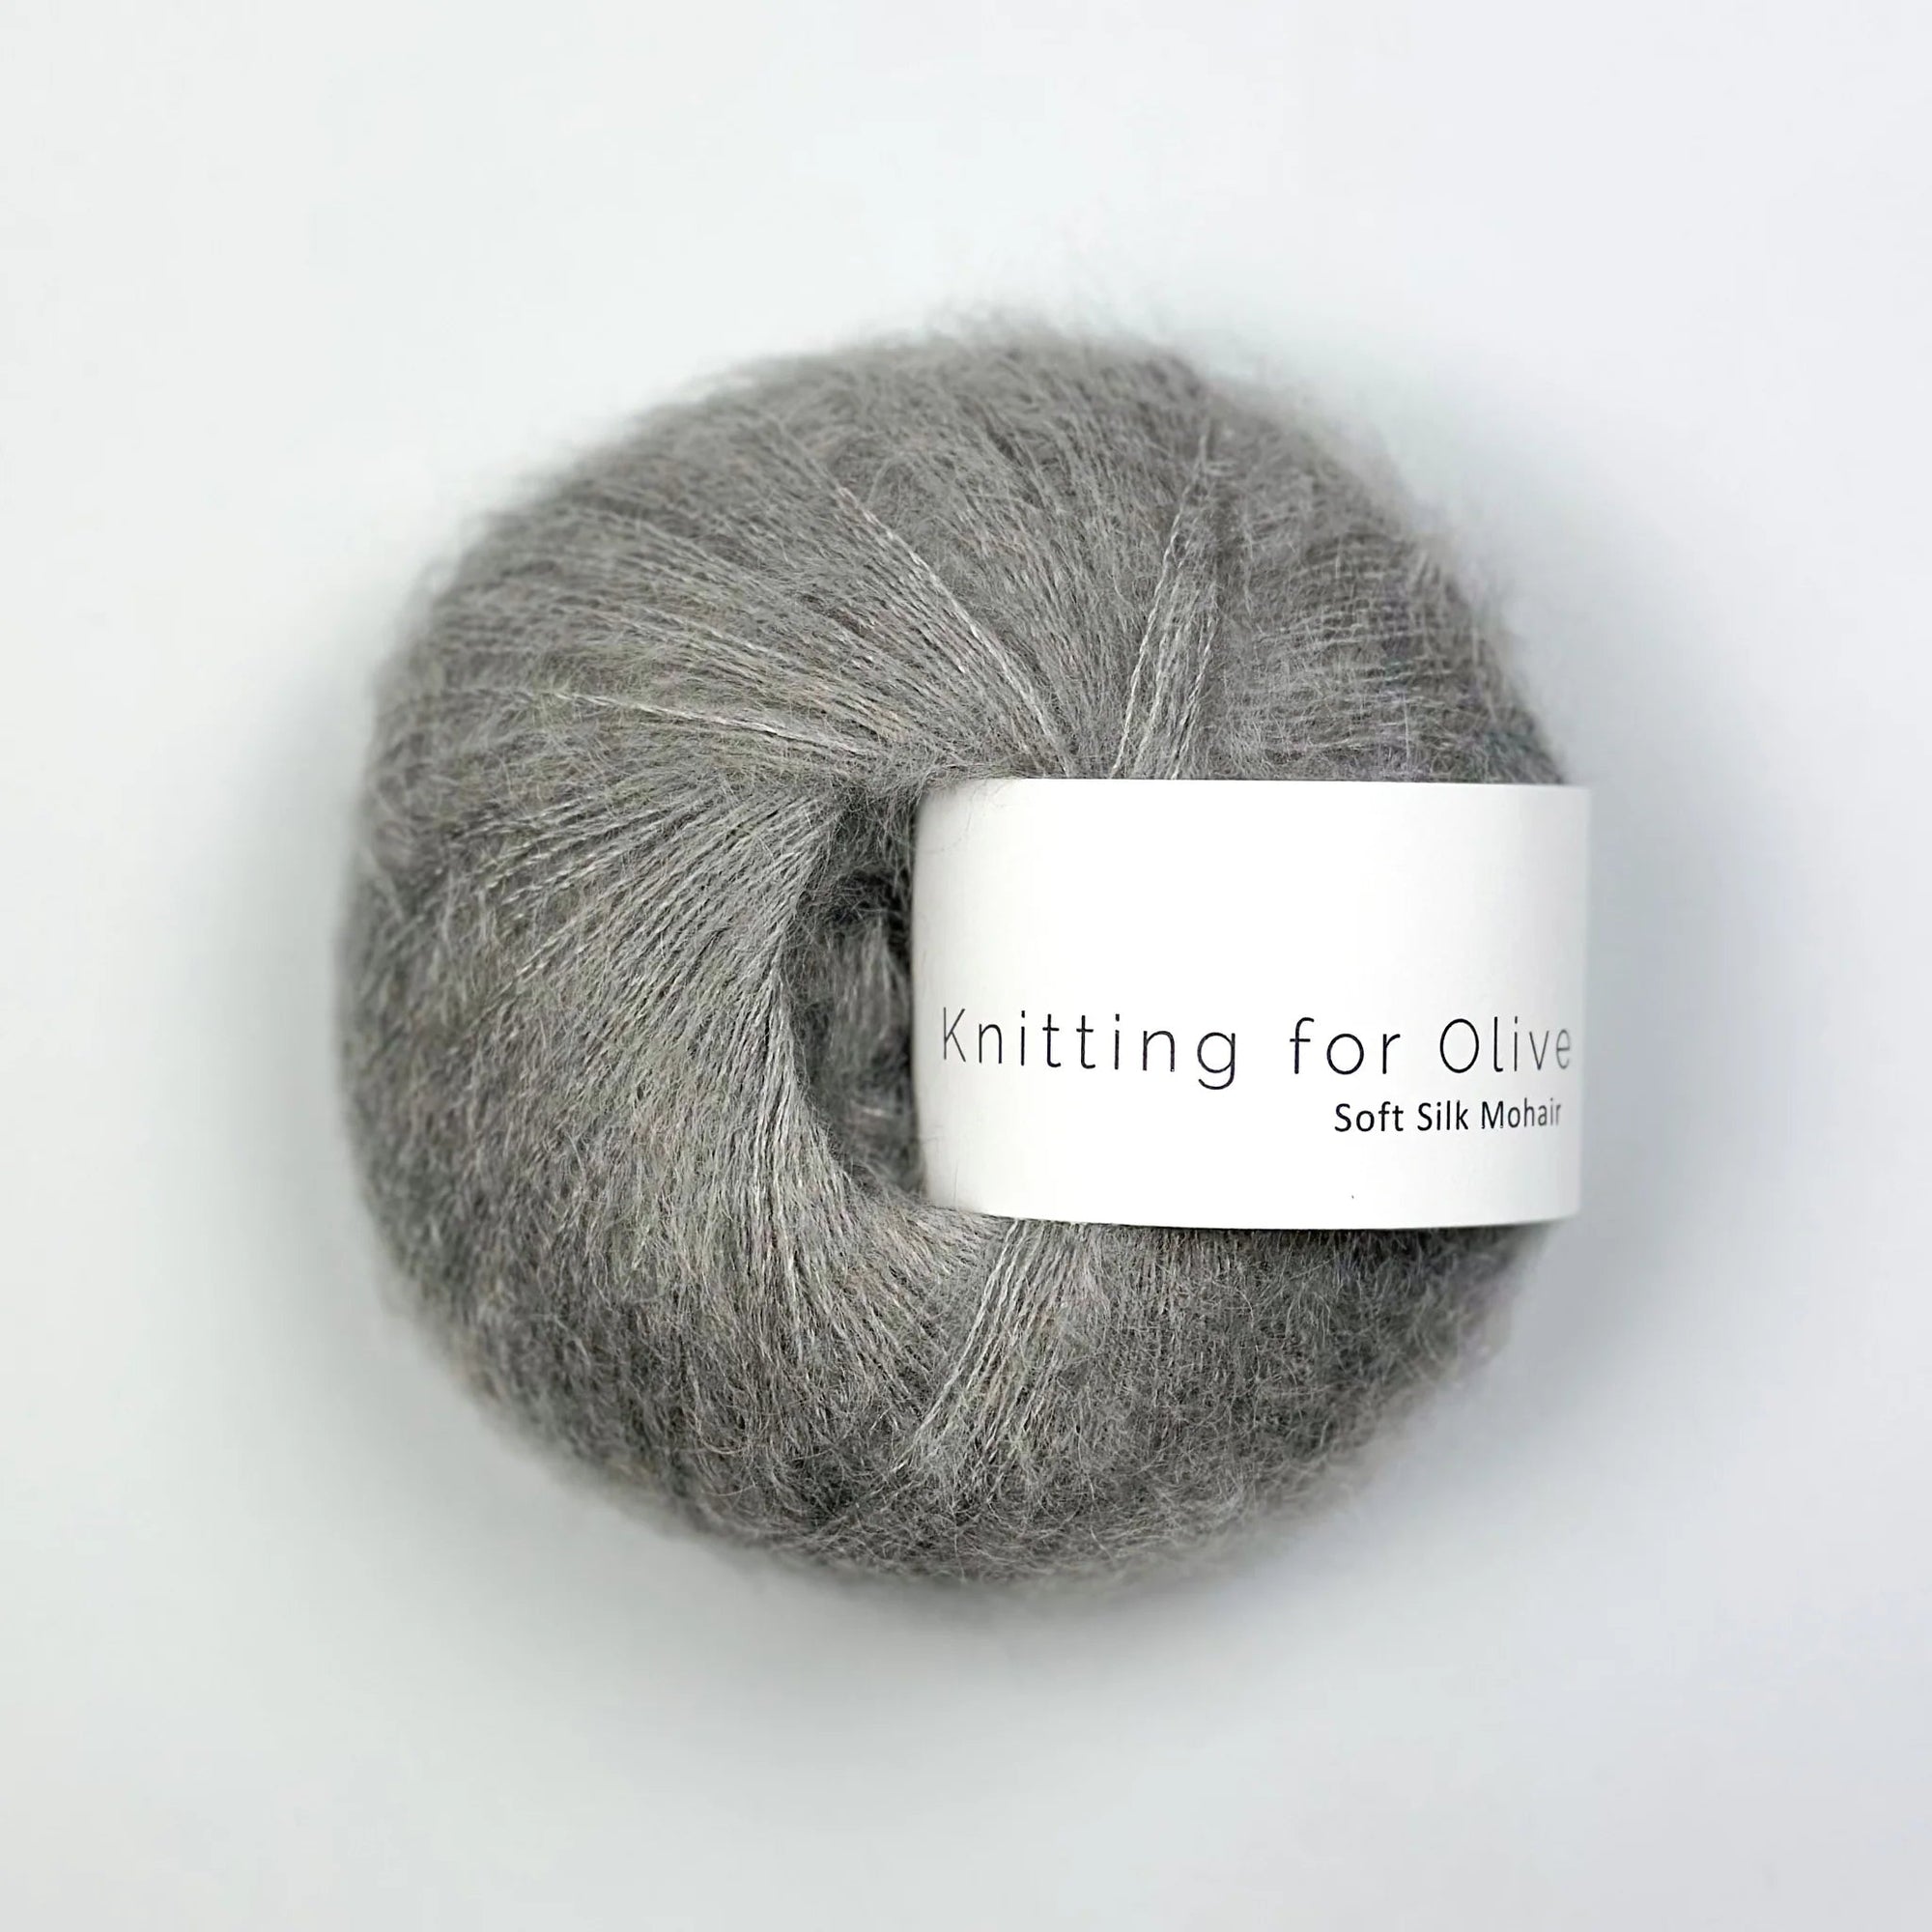 Knitting for Olive Soft Silk Mohair - Knitting for Olive - Rainy Day - The Little Yarn Store